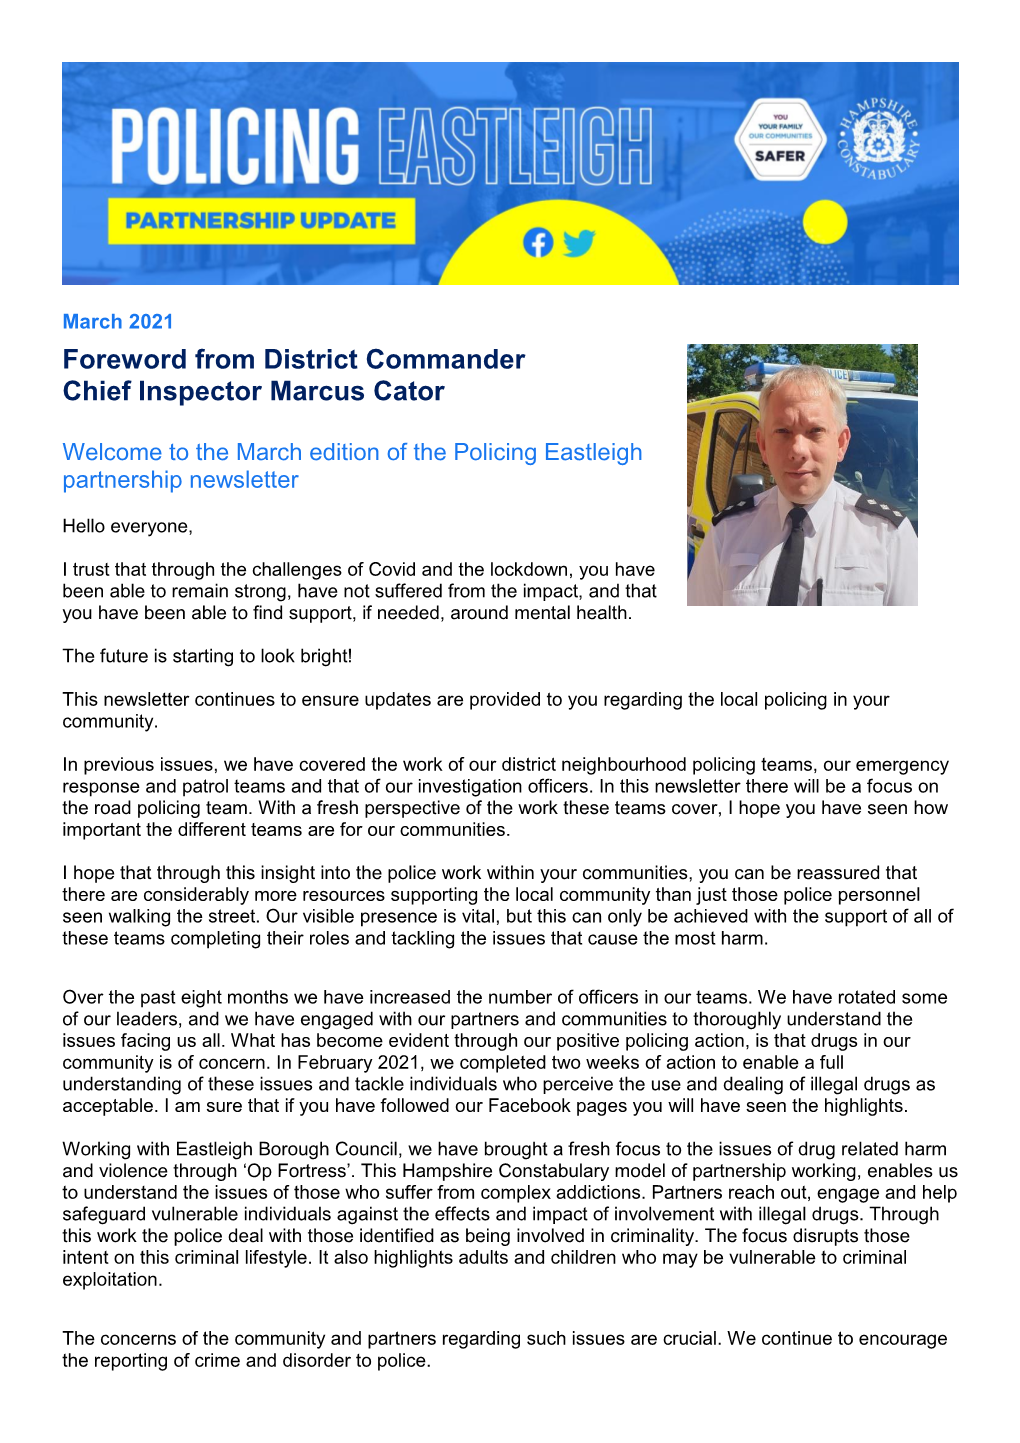 Foreword from District Commander Chief Inspector Marcus Cator